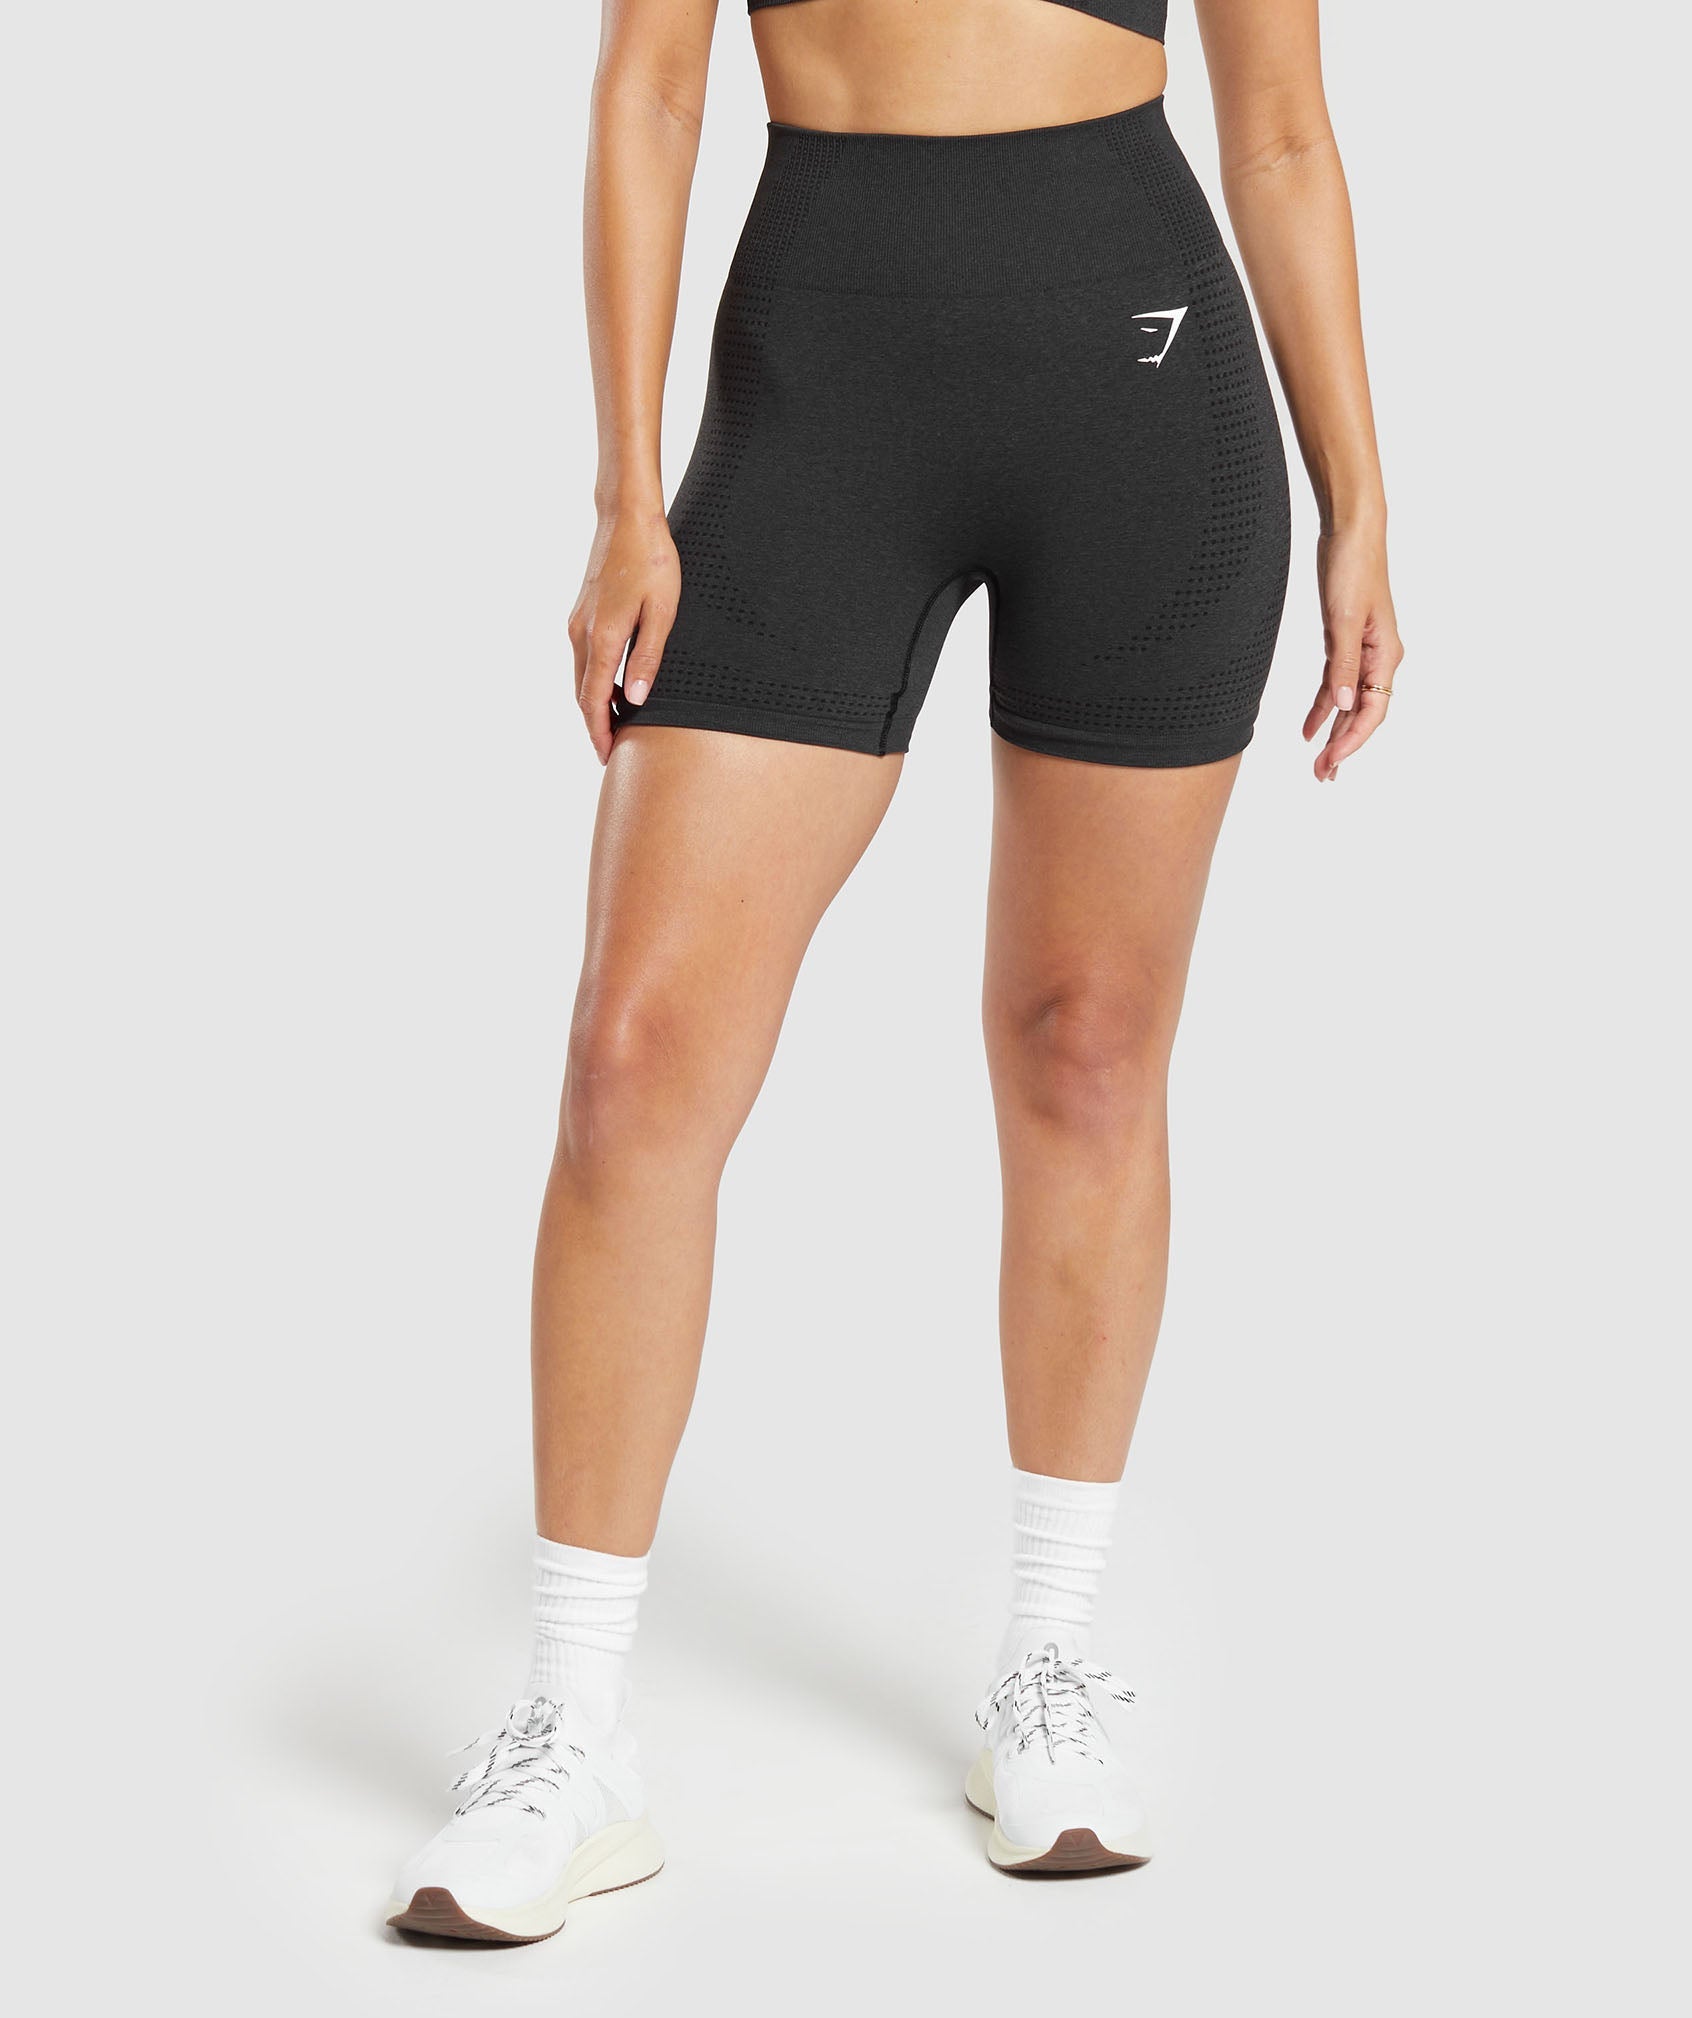 Women Tight Fitting Seamless Gym Shorts Hot Yoga Shorts - The Little  Connection